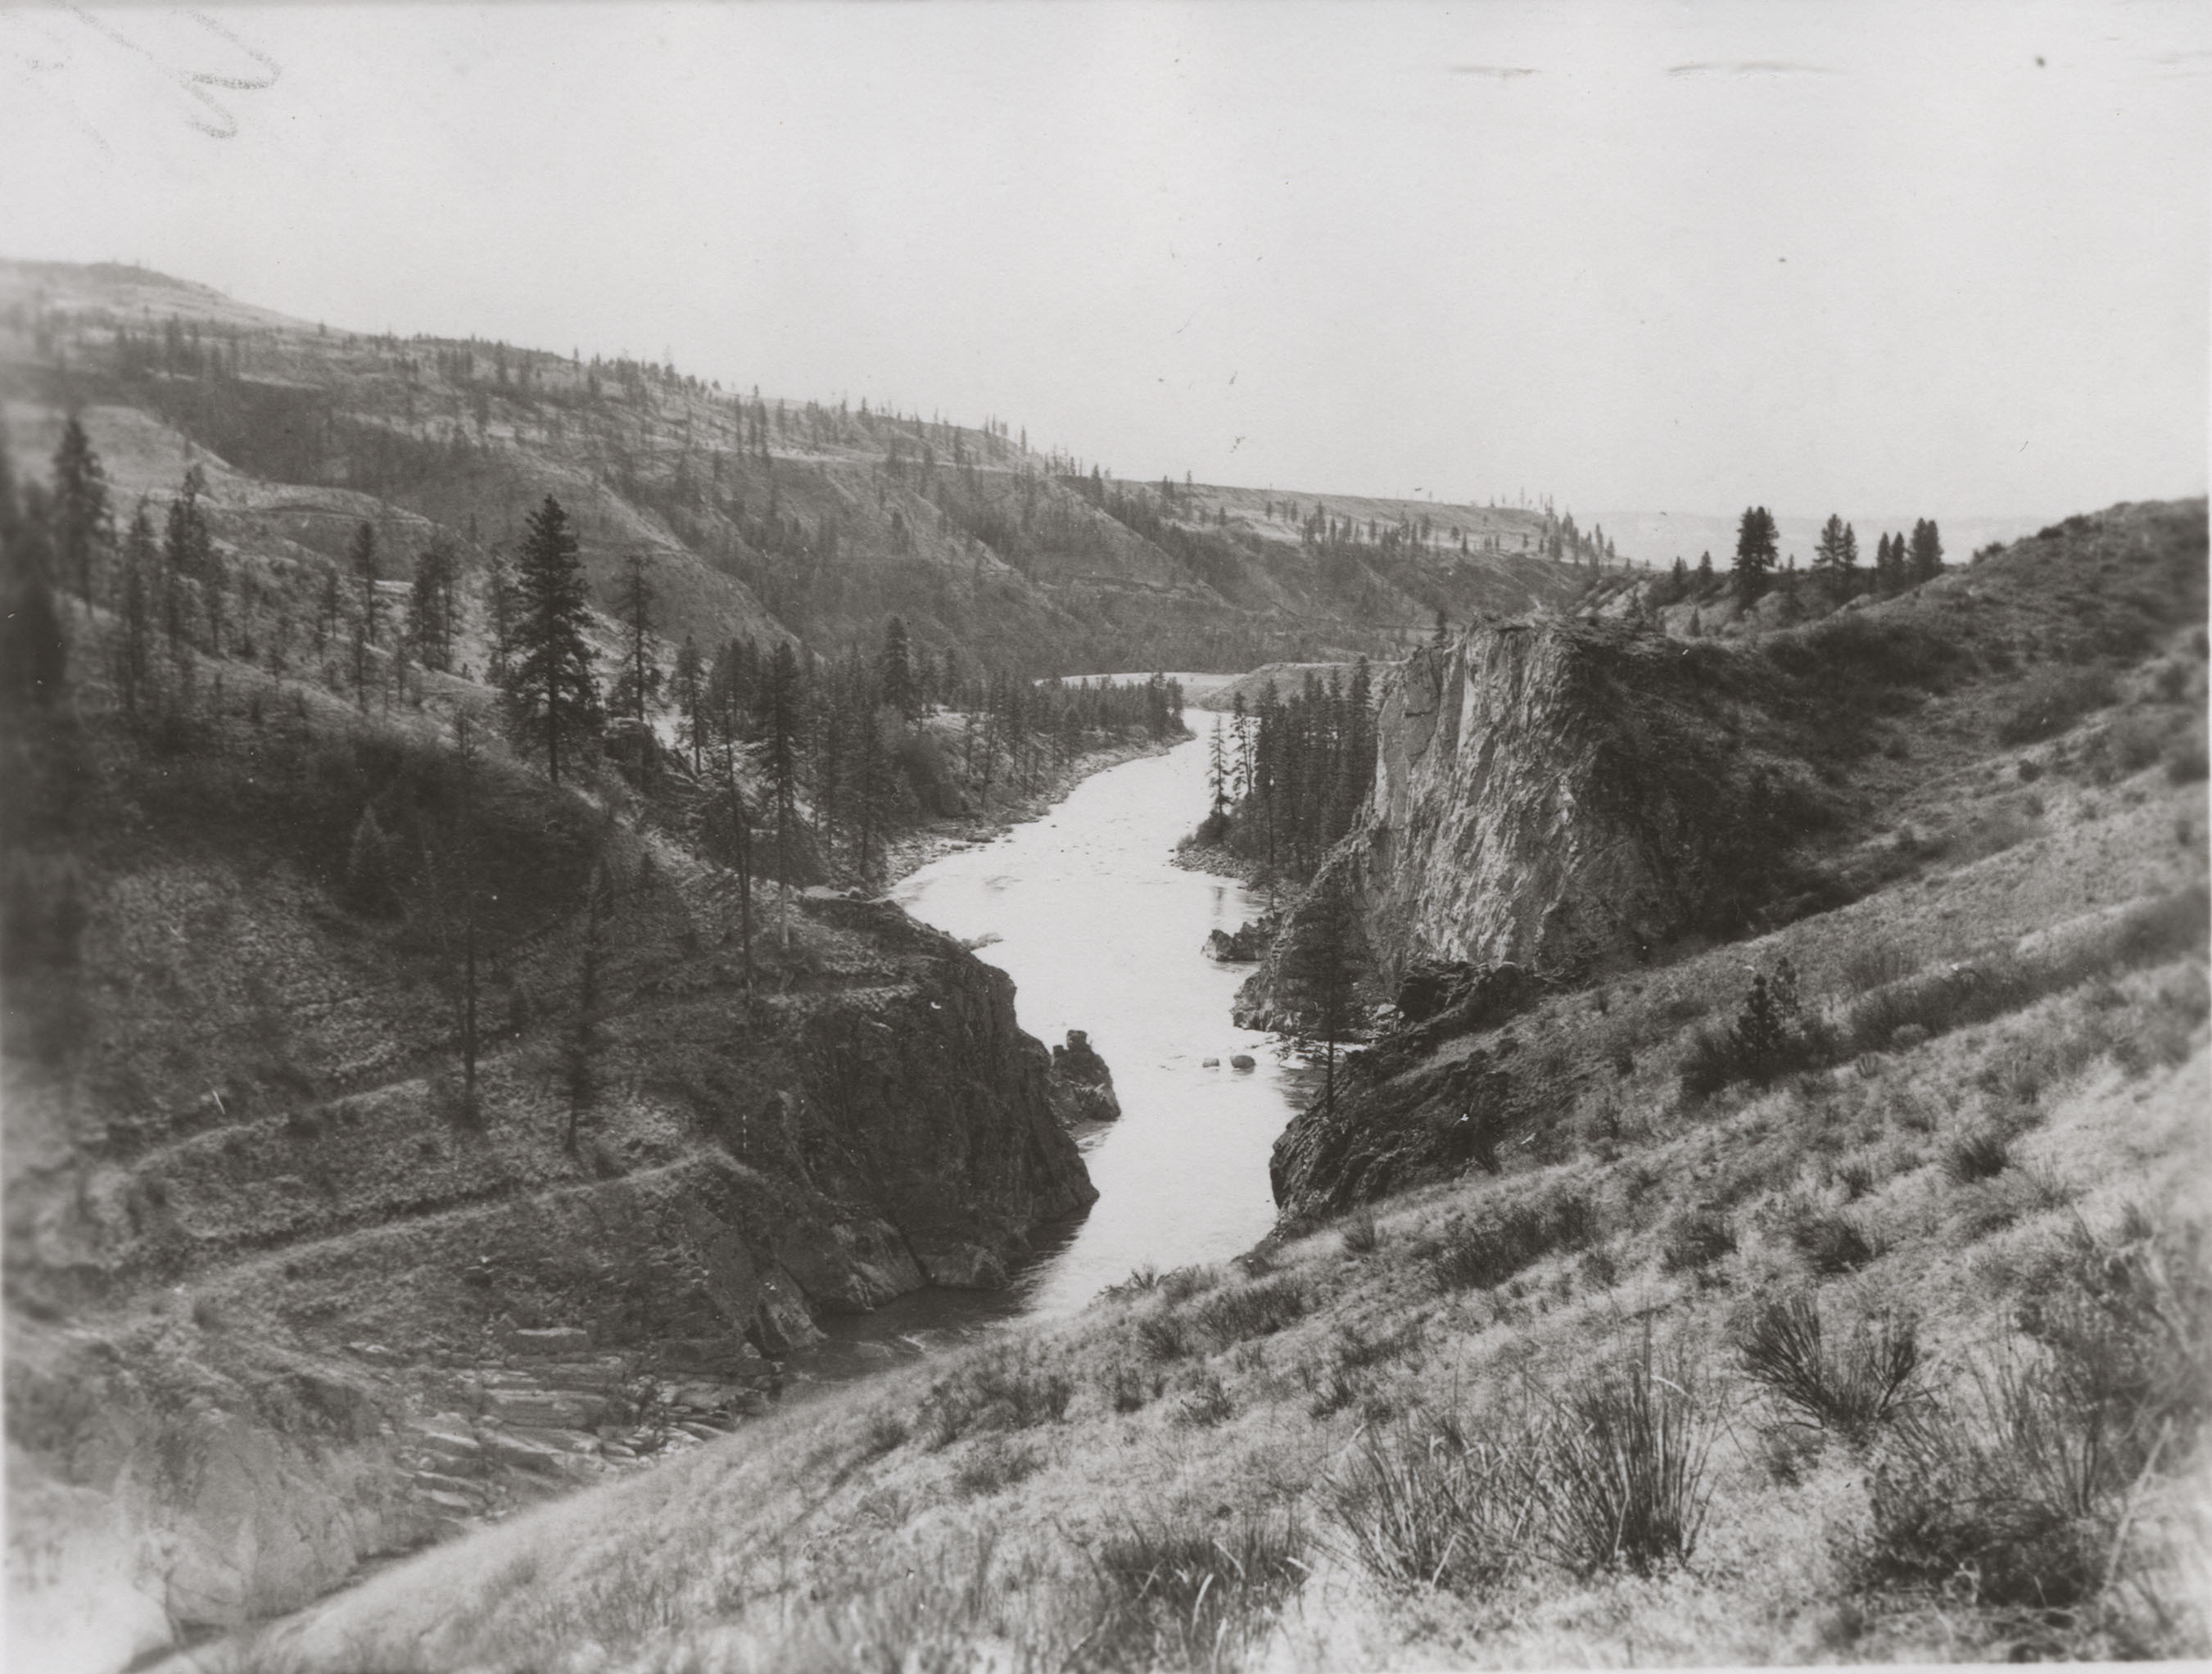 Black and white photograph of a river in a steep sided valley with partially forested hills